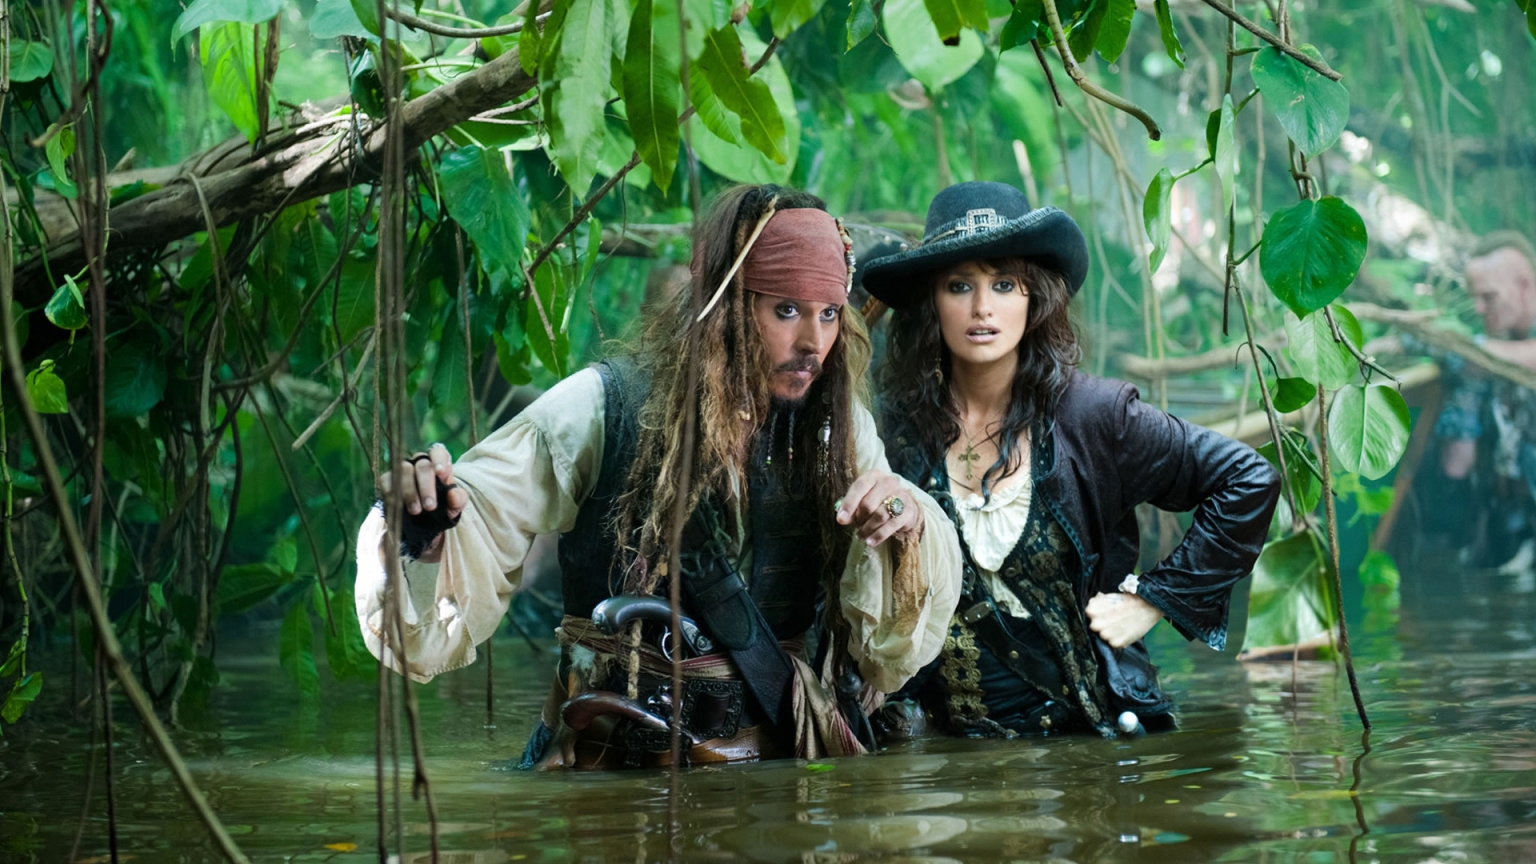 Jack Sparrow and Angelica for 1536 x 864 HDTV resolution